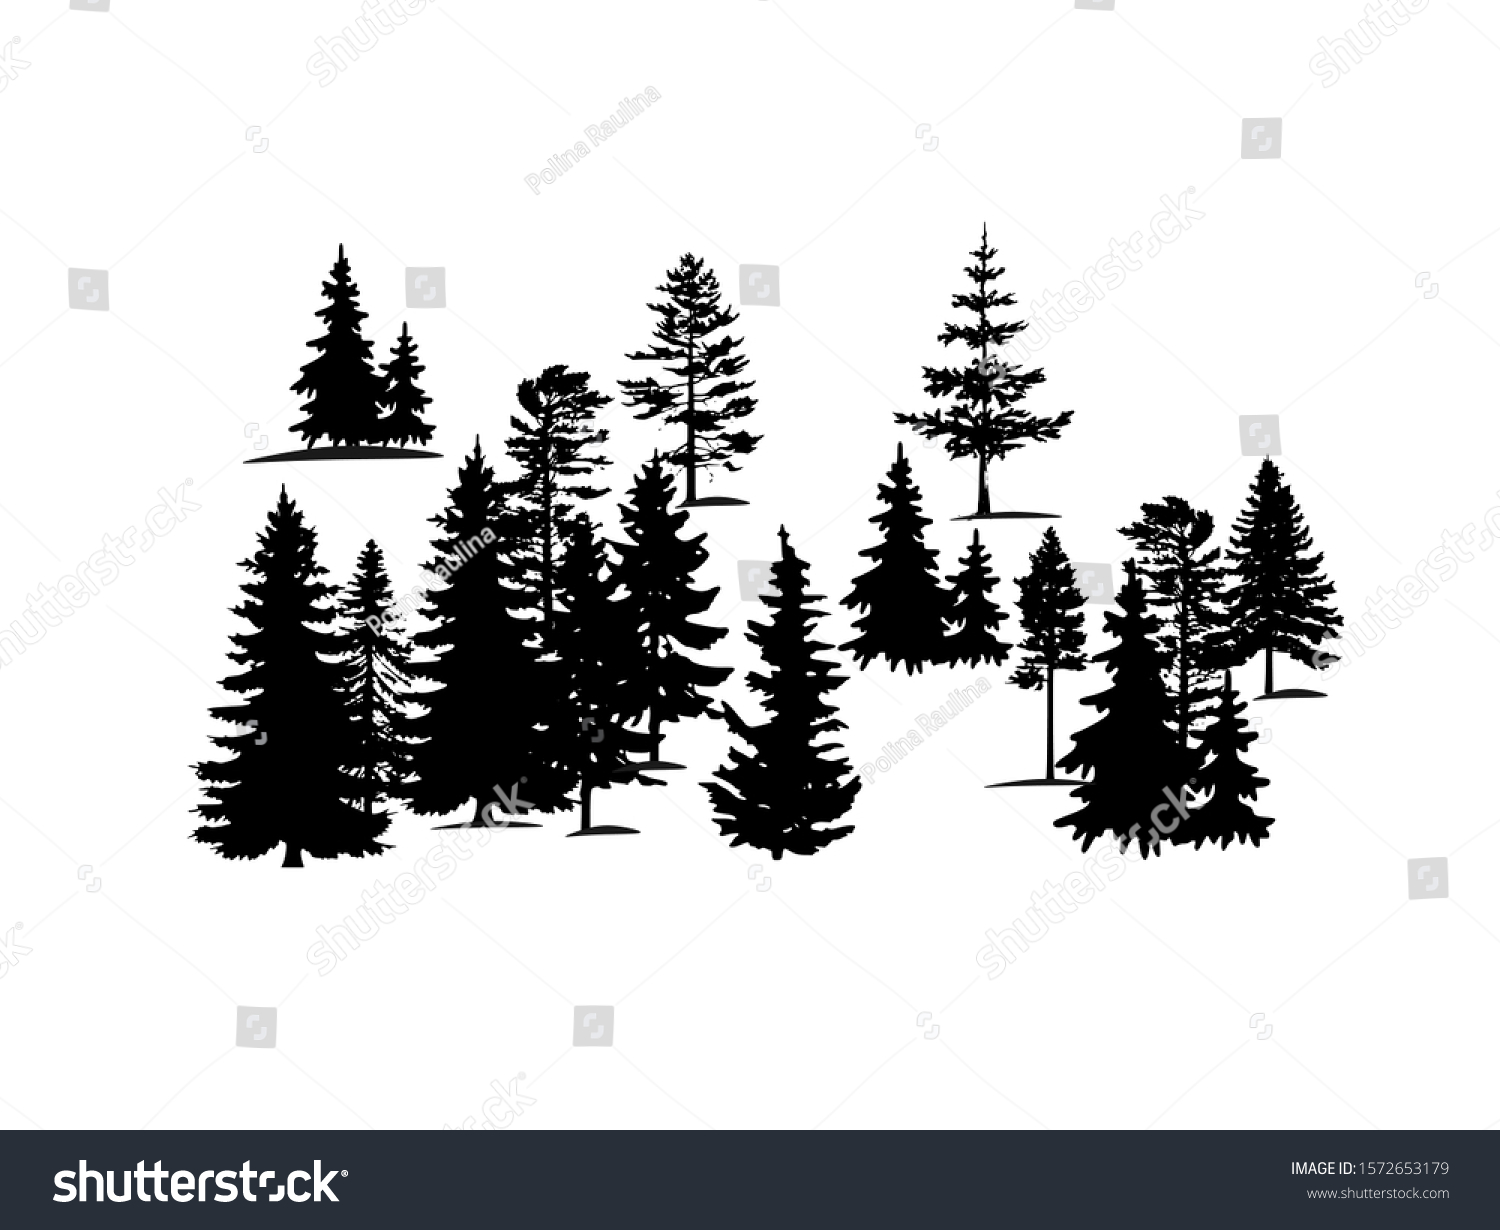 SVG of Forest trees silhouette vector background. Stencil of pine,fir,cypress.Christmas tree drawing.Winter spruces landscape border banner design.Wooden decor element for Happy new year isolated on white. svg